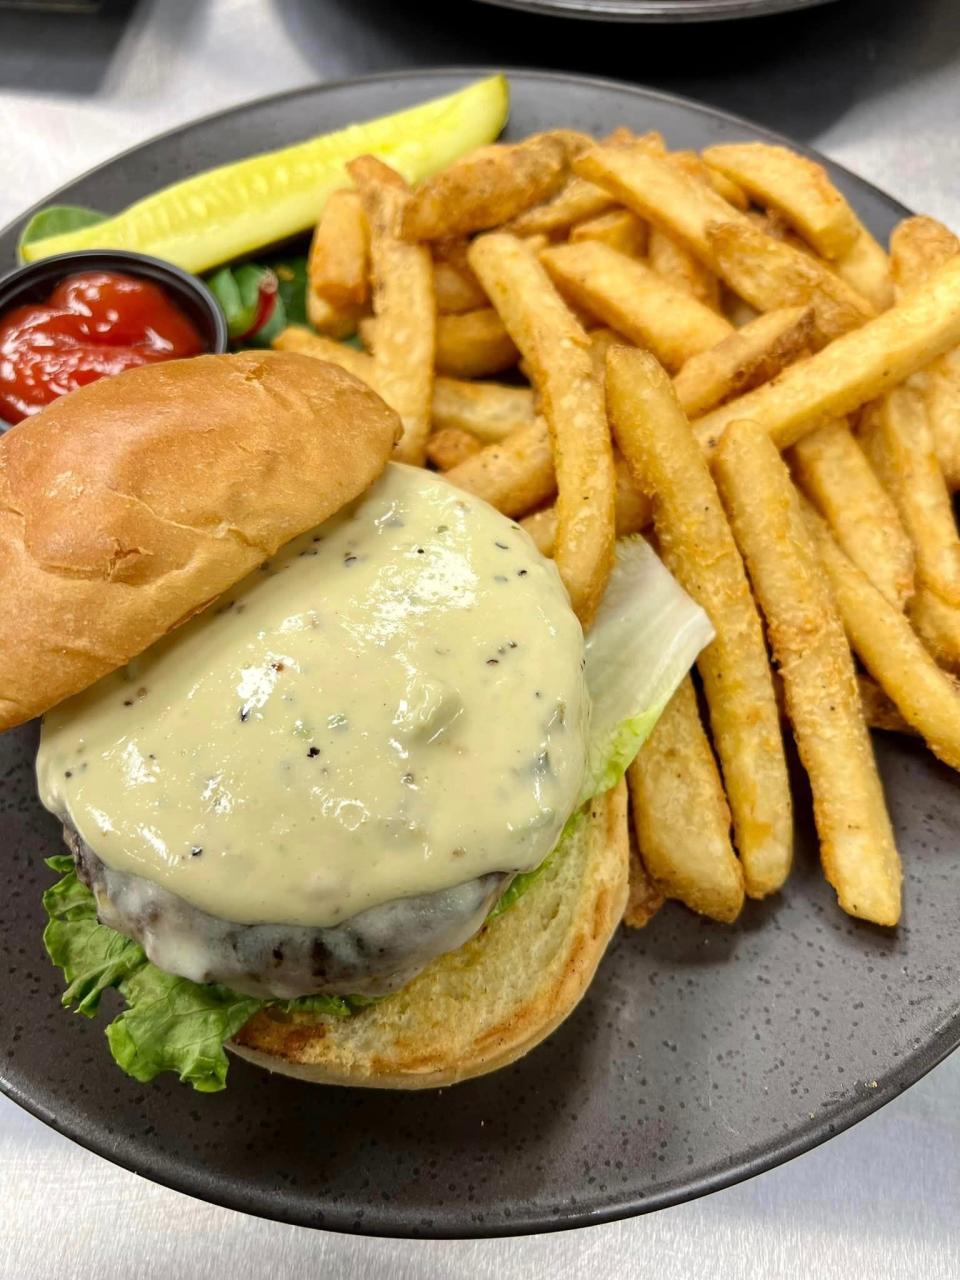 The Huntsman at The Charred Oak Tavern in Middleboro is made with elk, bison, wagyu and wild boar, and topped with cheddar cheese.